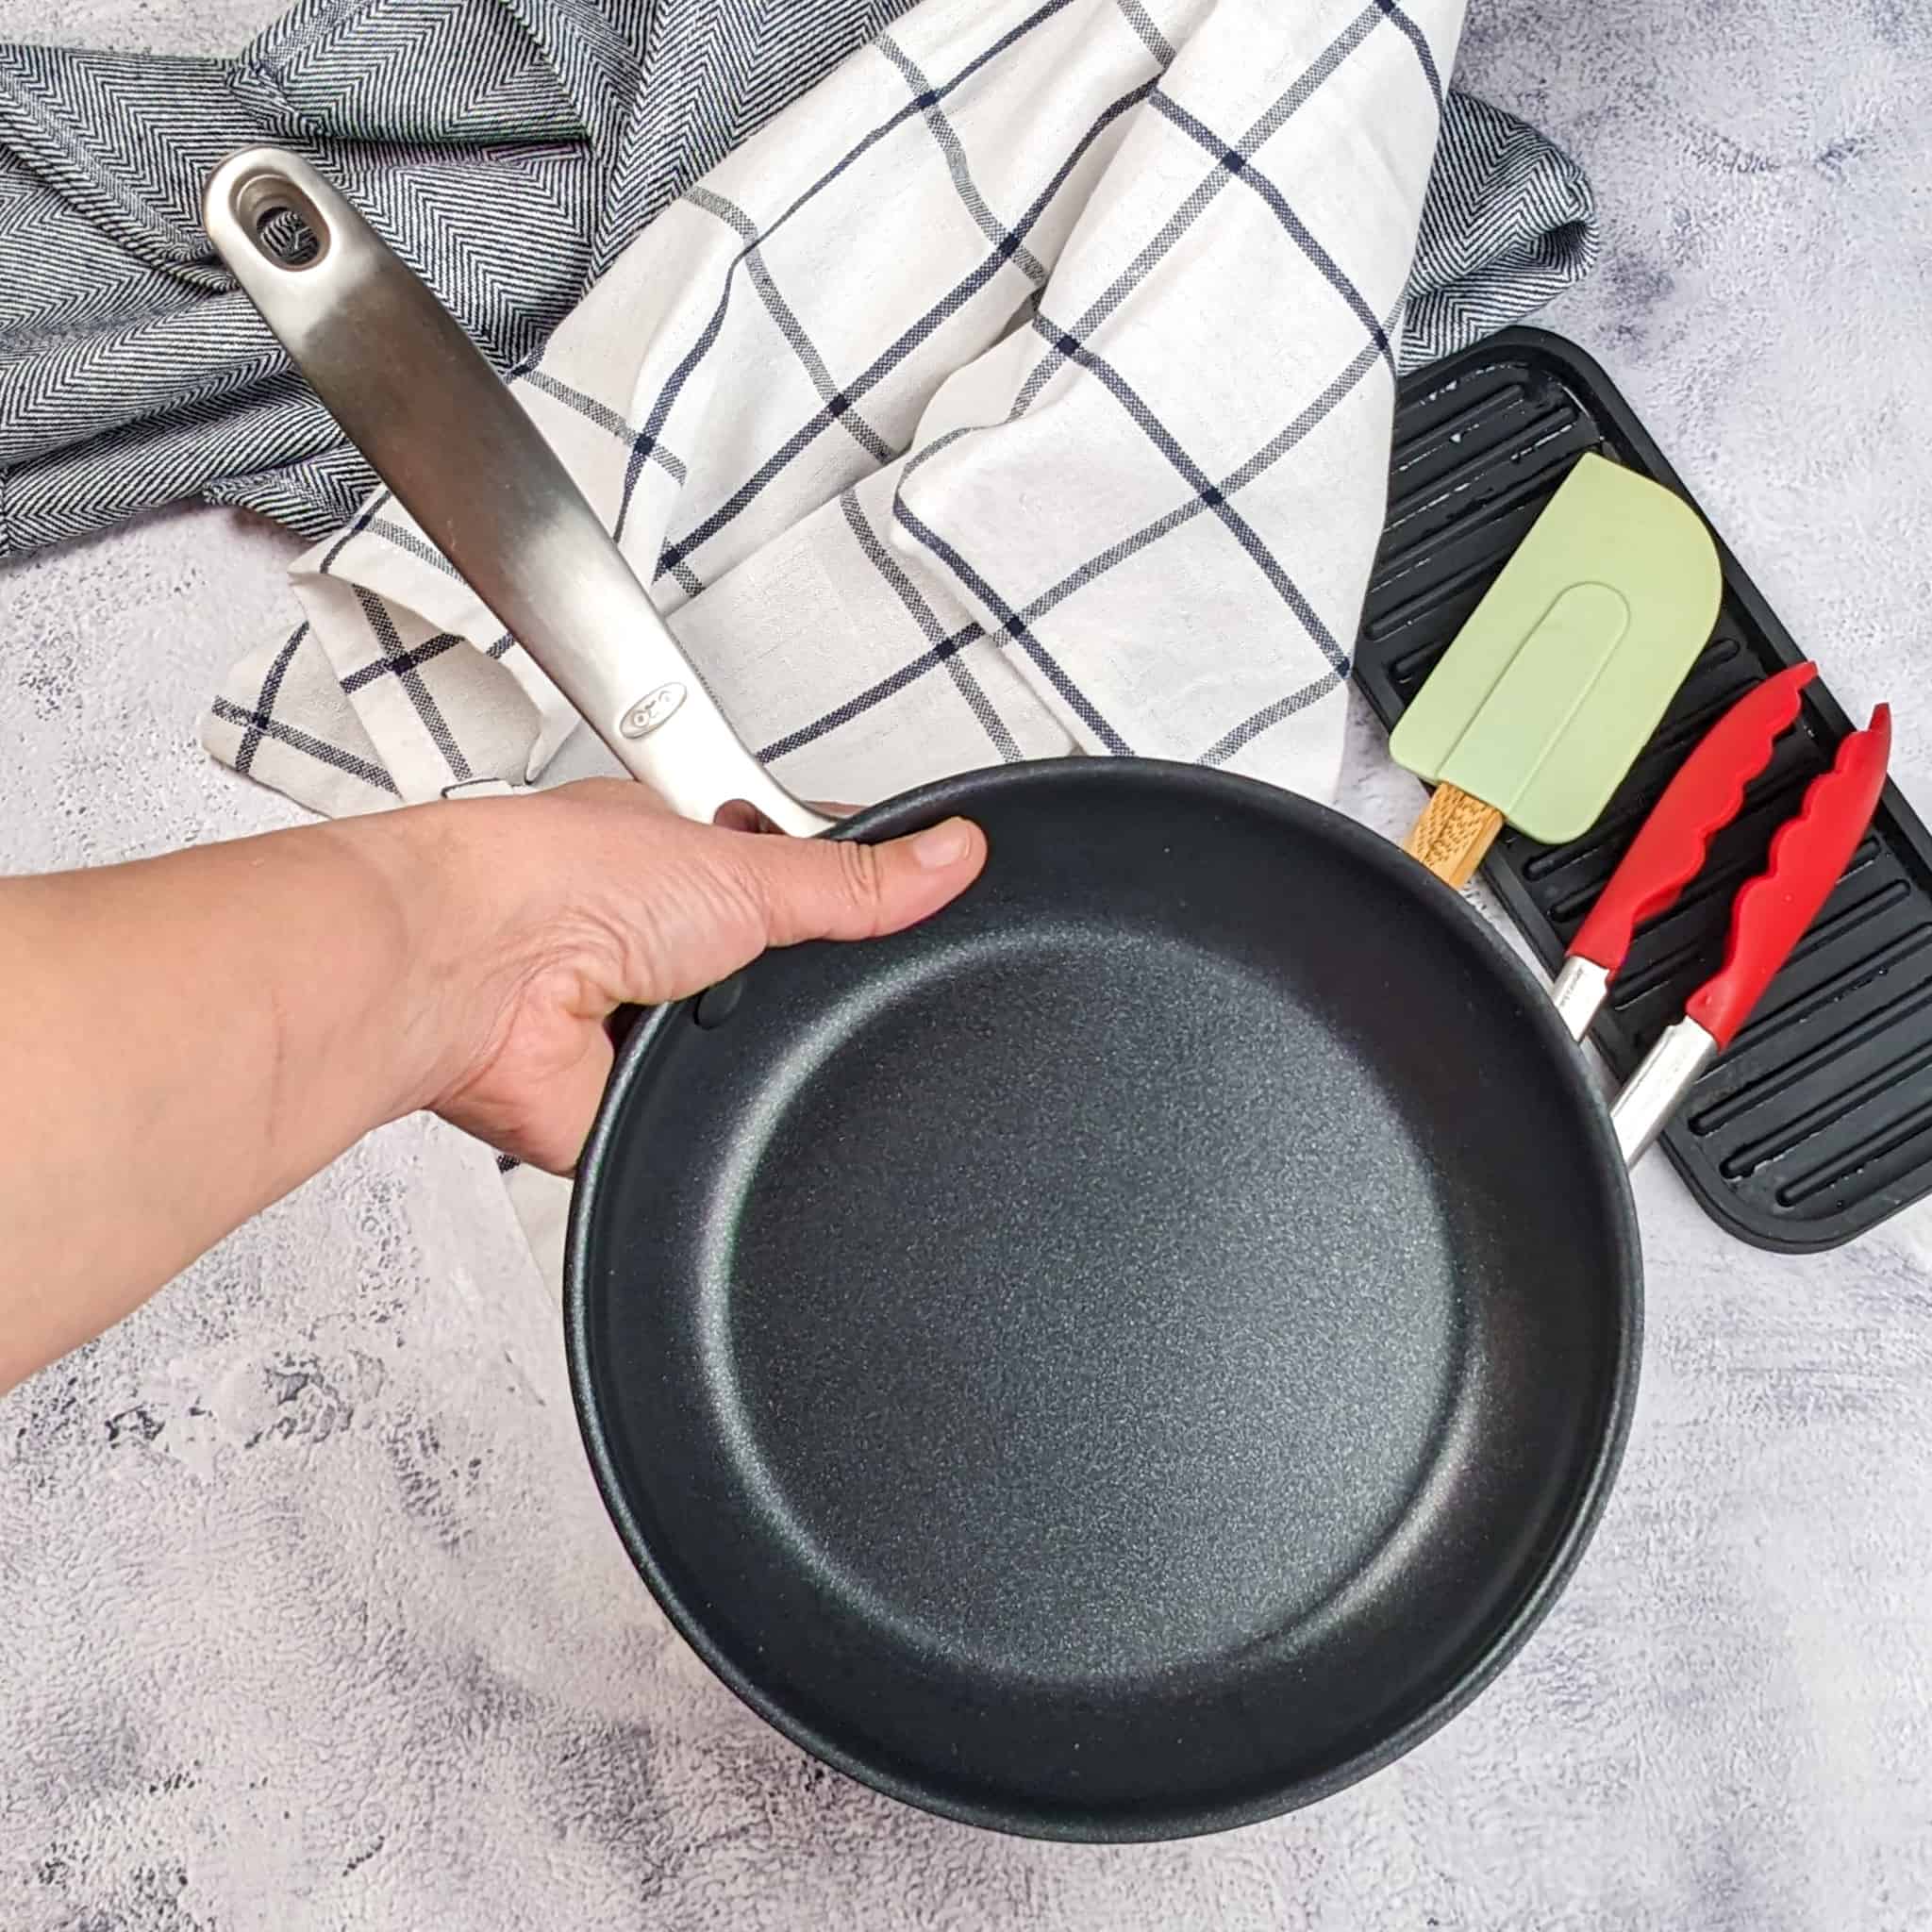 The OXO Good Grips Pro 8" frying pan skillet held in the hand over a background of towels, silicone resting tray, a KitchenAid silicone spatula and a pair of KitchenAid silicone tongs.